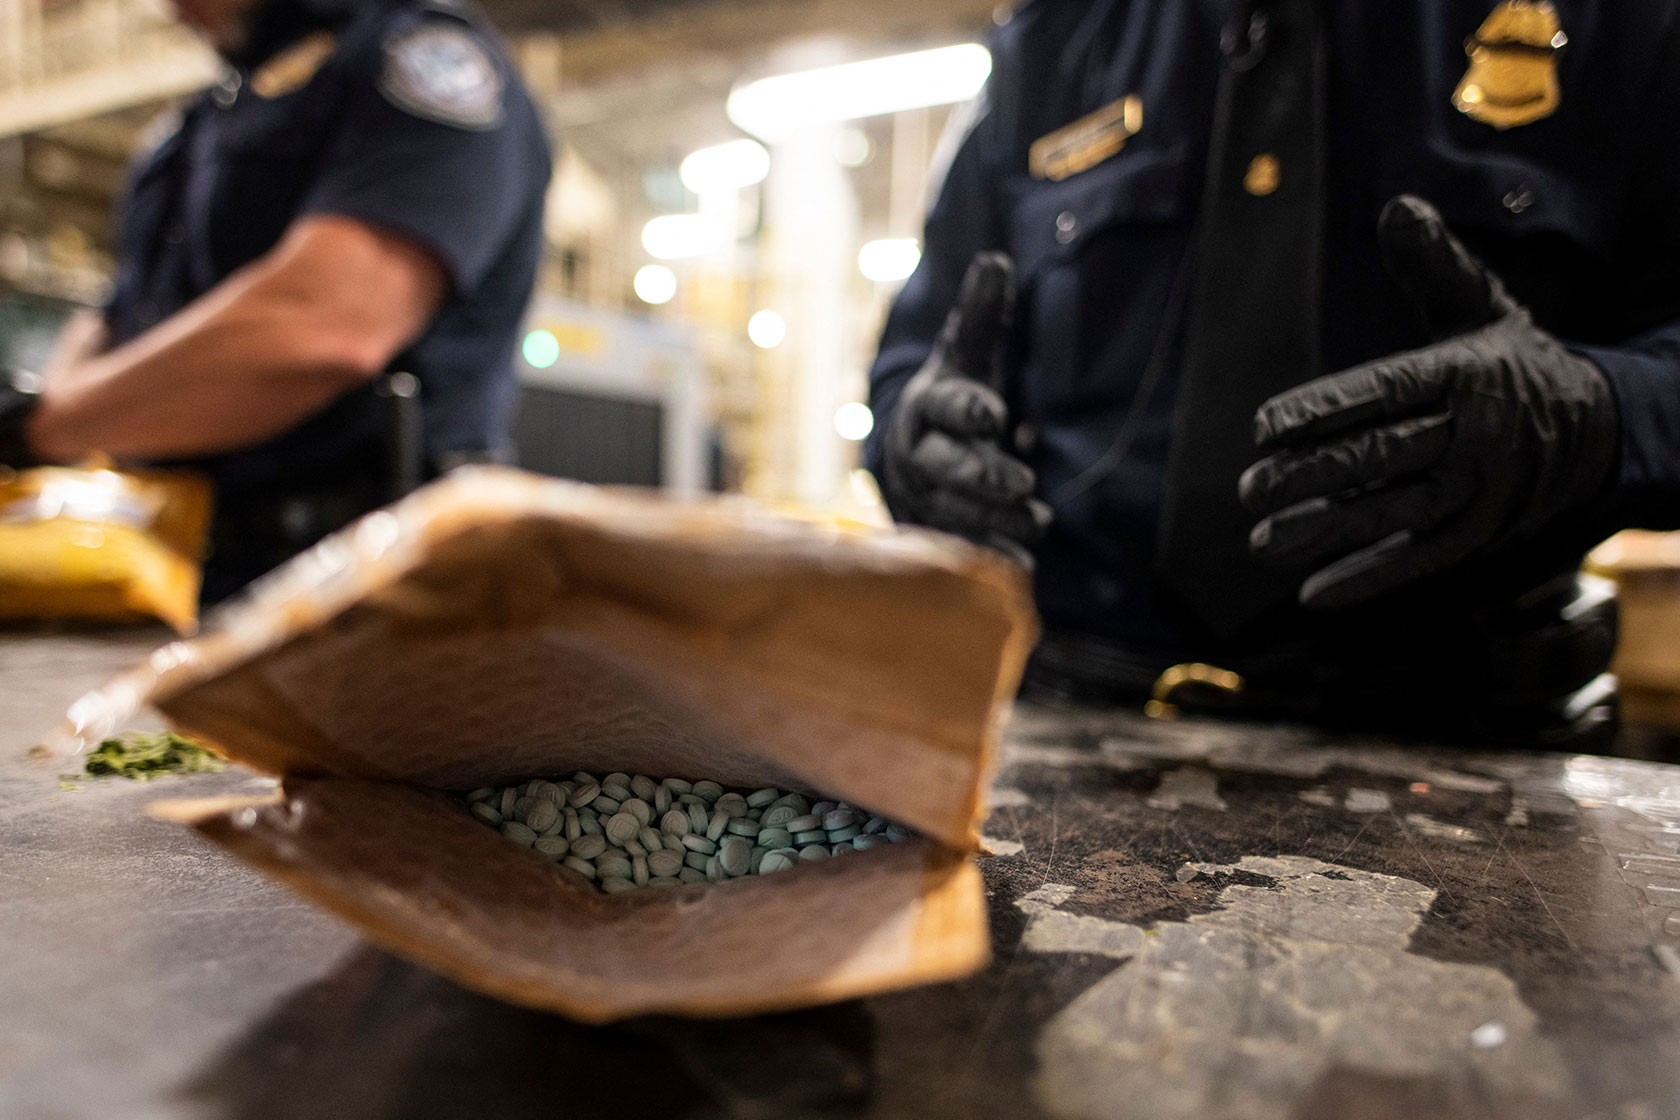 U.S. Customs and Border Protection agents sift through packages in search of fentanyl.